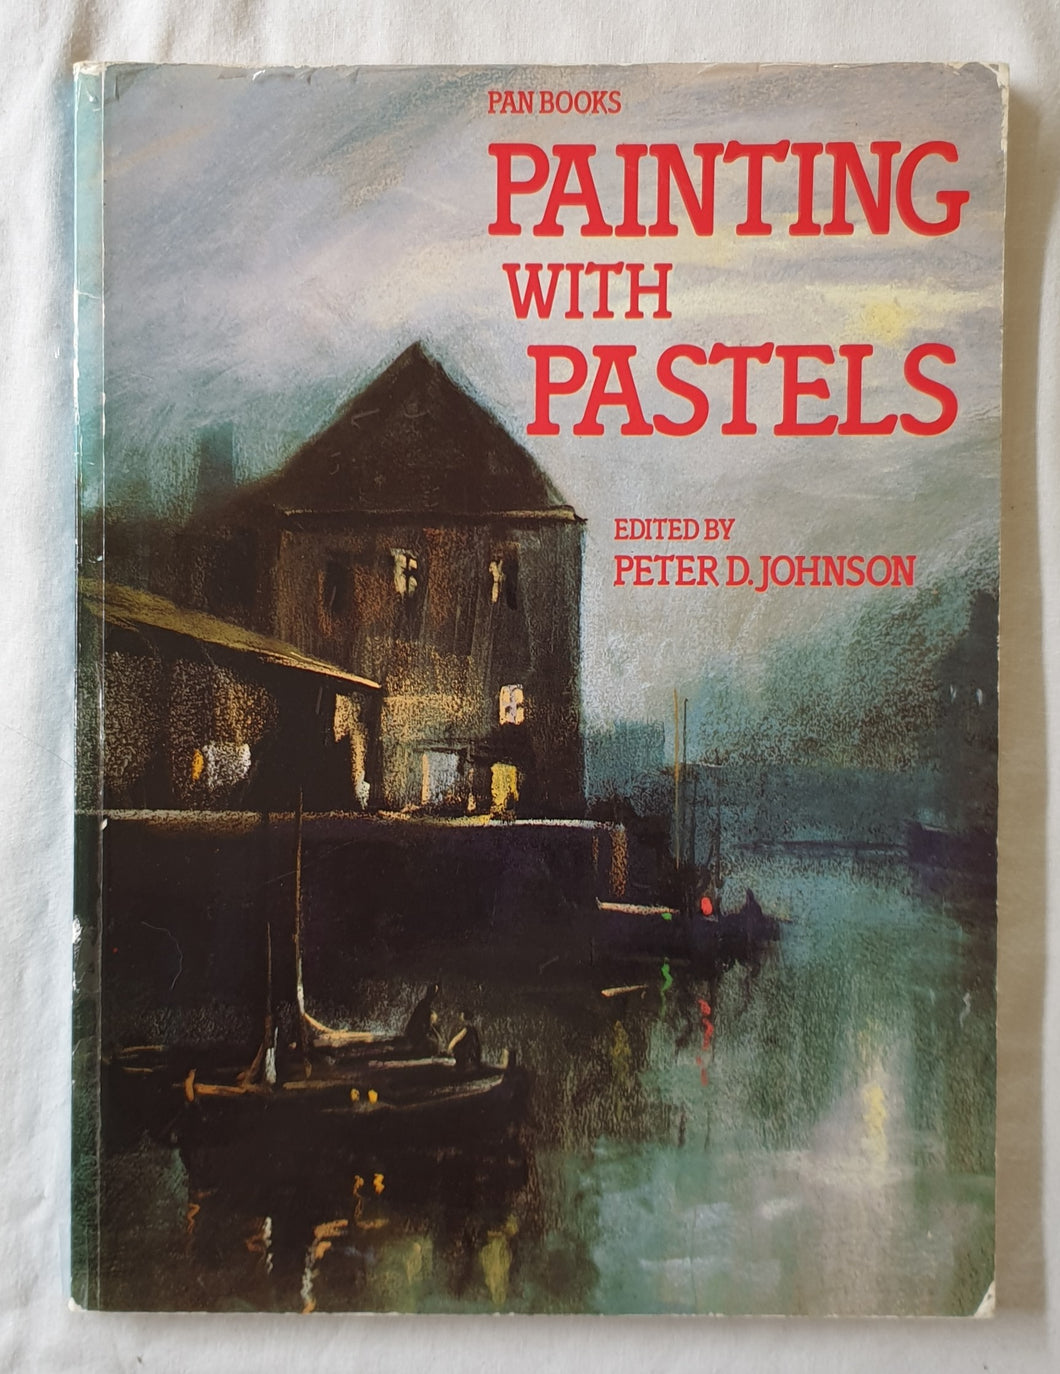 Painting with Pastels  Aubrey Skyes, Christopher Stones, Aubrey Phillips, Dennis Frost, Sally Michel  Edited by Peter D. Johnson